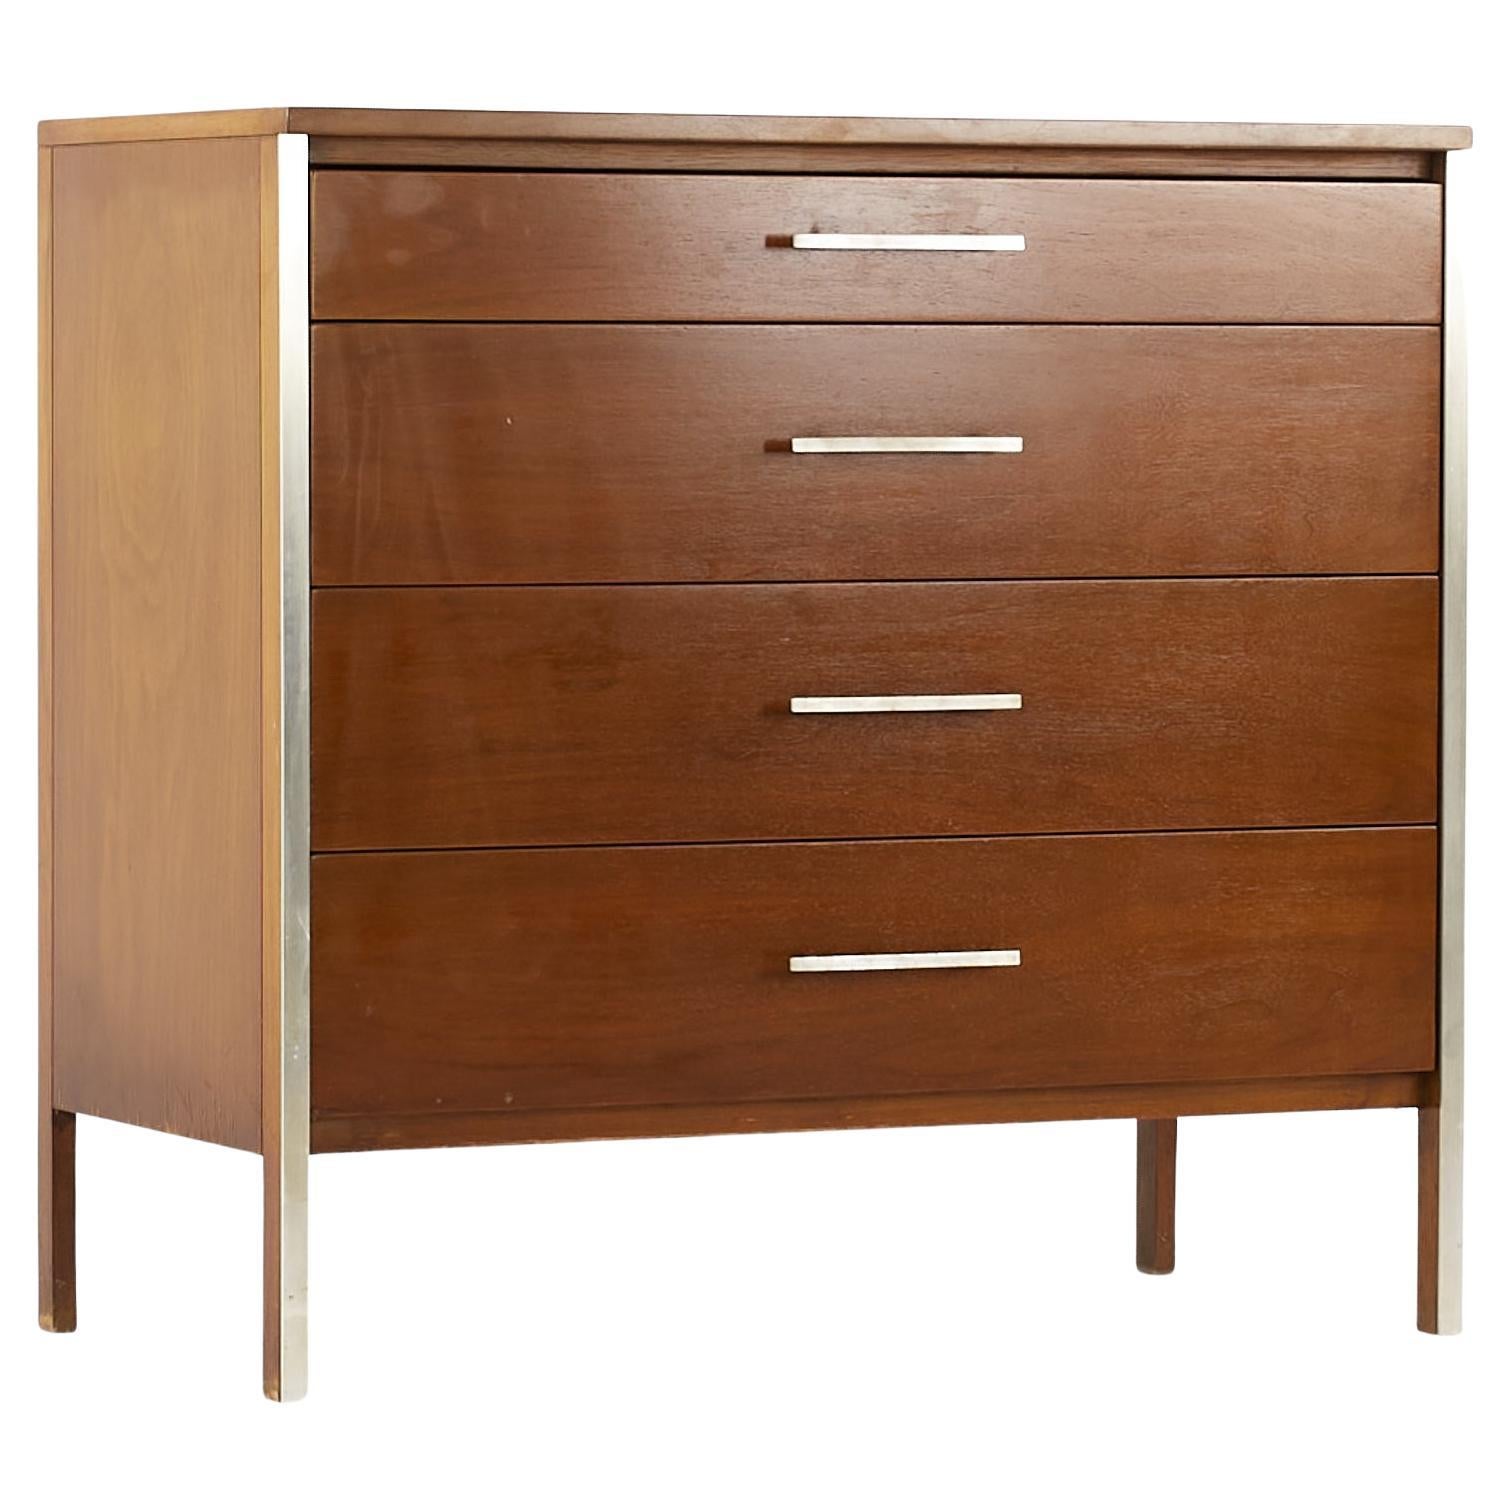 Paul McCobb Calvin Linear MCM Walnut Stainless Steel 4 Drawer Chest of Drawers